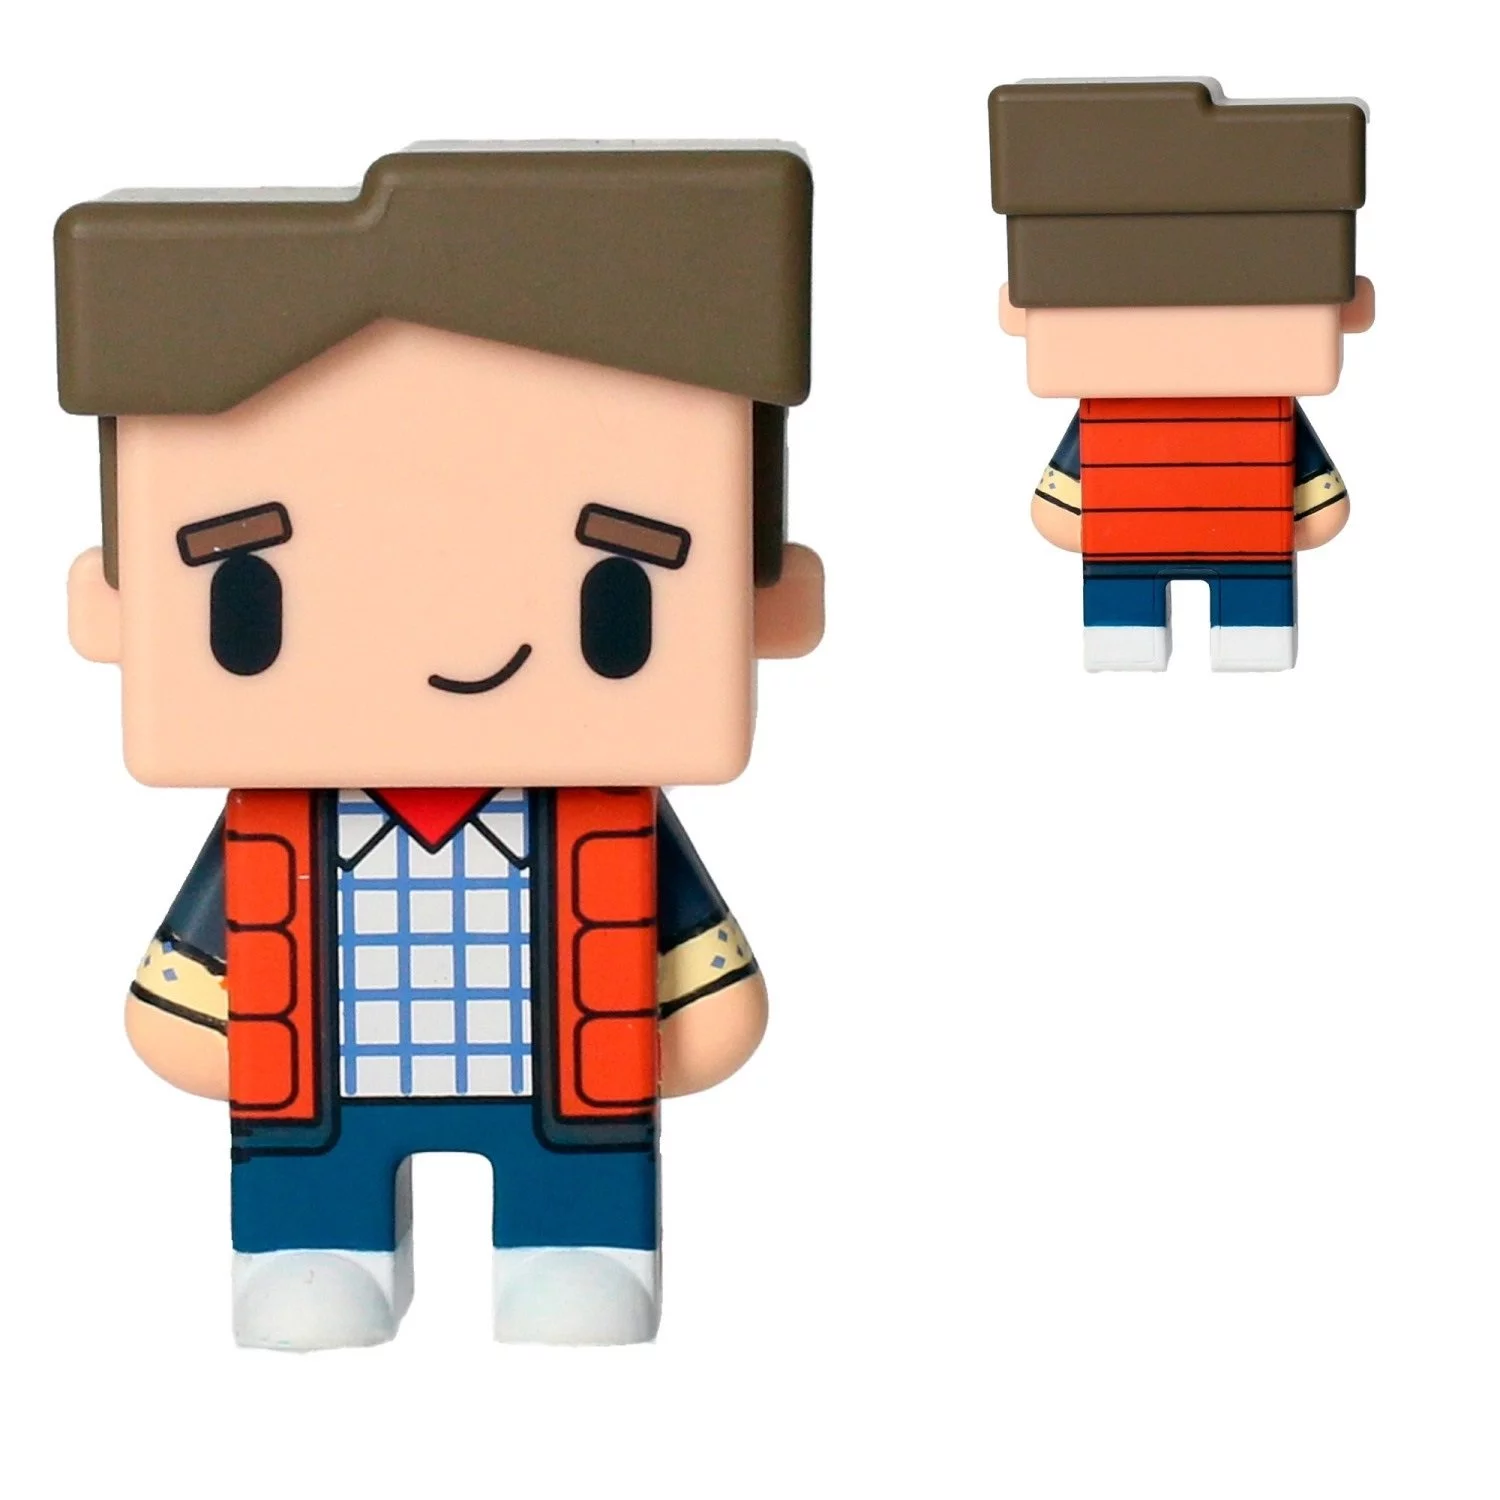 Figura Pixel: Back to the Future - Marty McFly